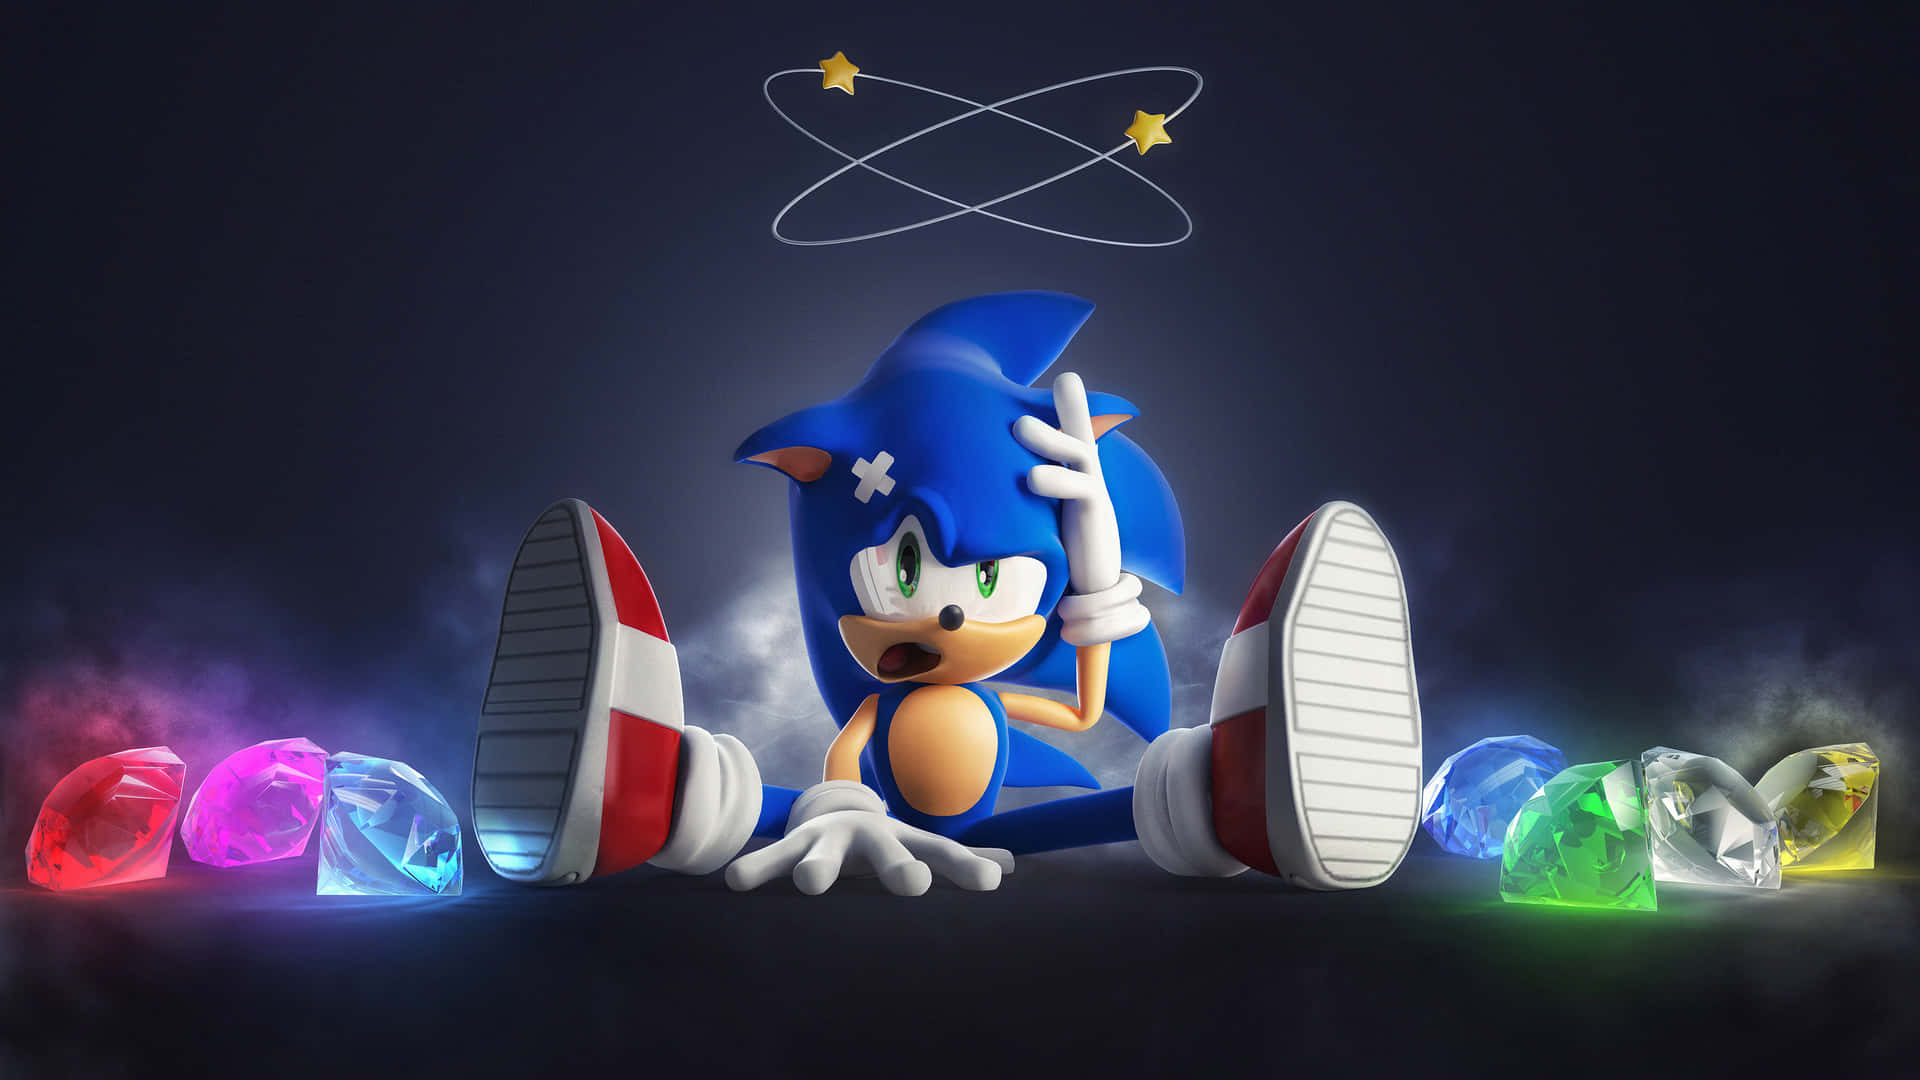 Sonic the Hedgehog in Super Sonic Form Wallpaper